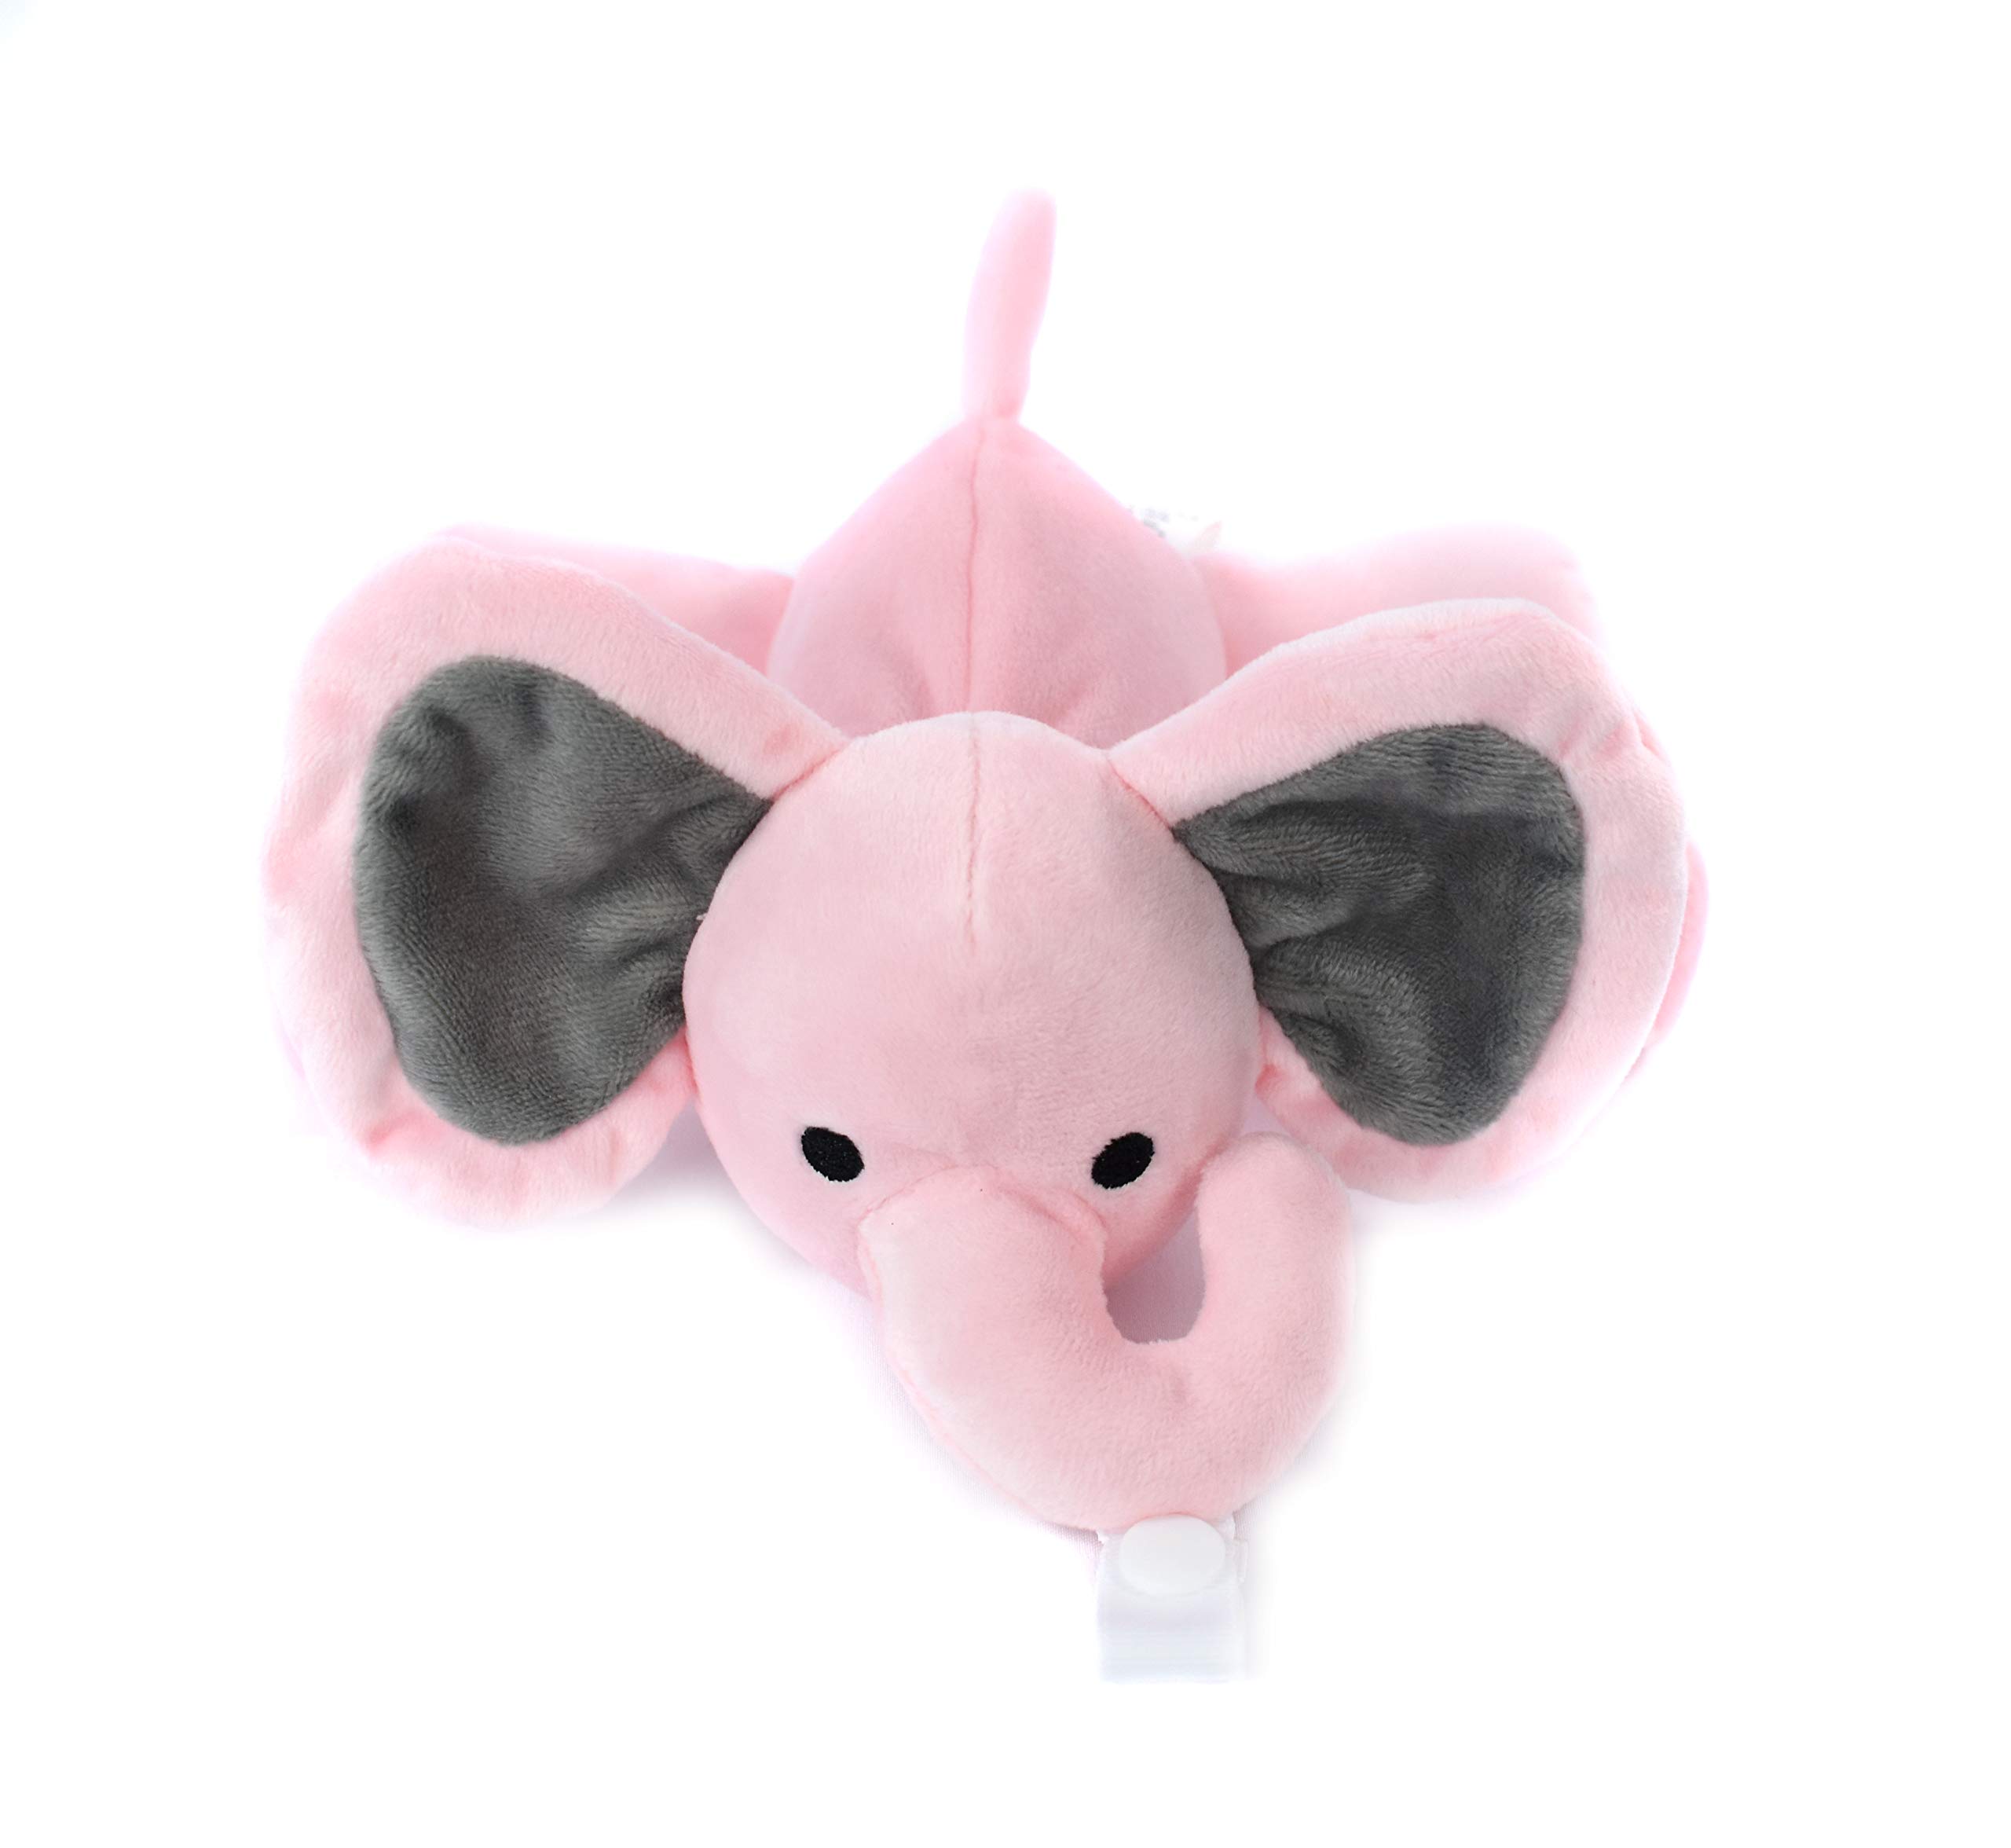 KINREX Baby Pacifier Holder Soft Elephant Stuffed Animal with Pacifiers  Binky Clip for Newborn Babies Boys & Girls Preemie Infant Pink Measures 18  cm. / 7.09